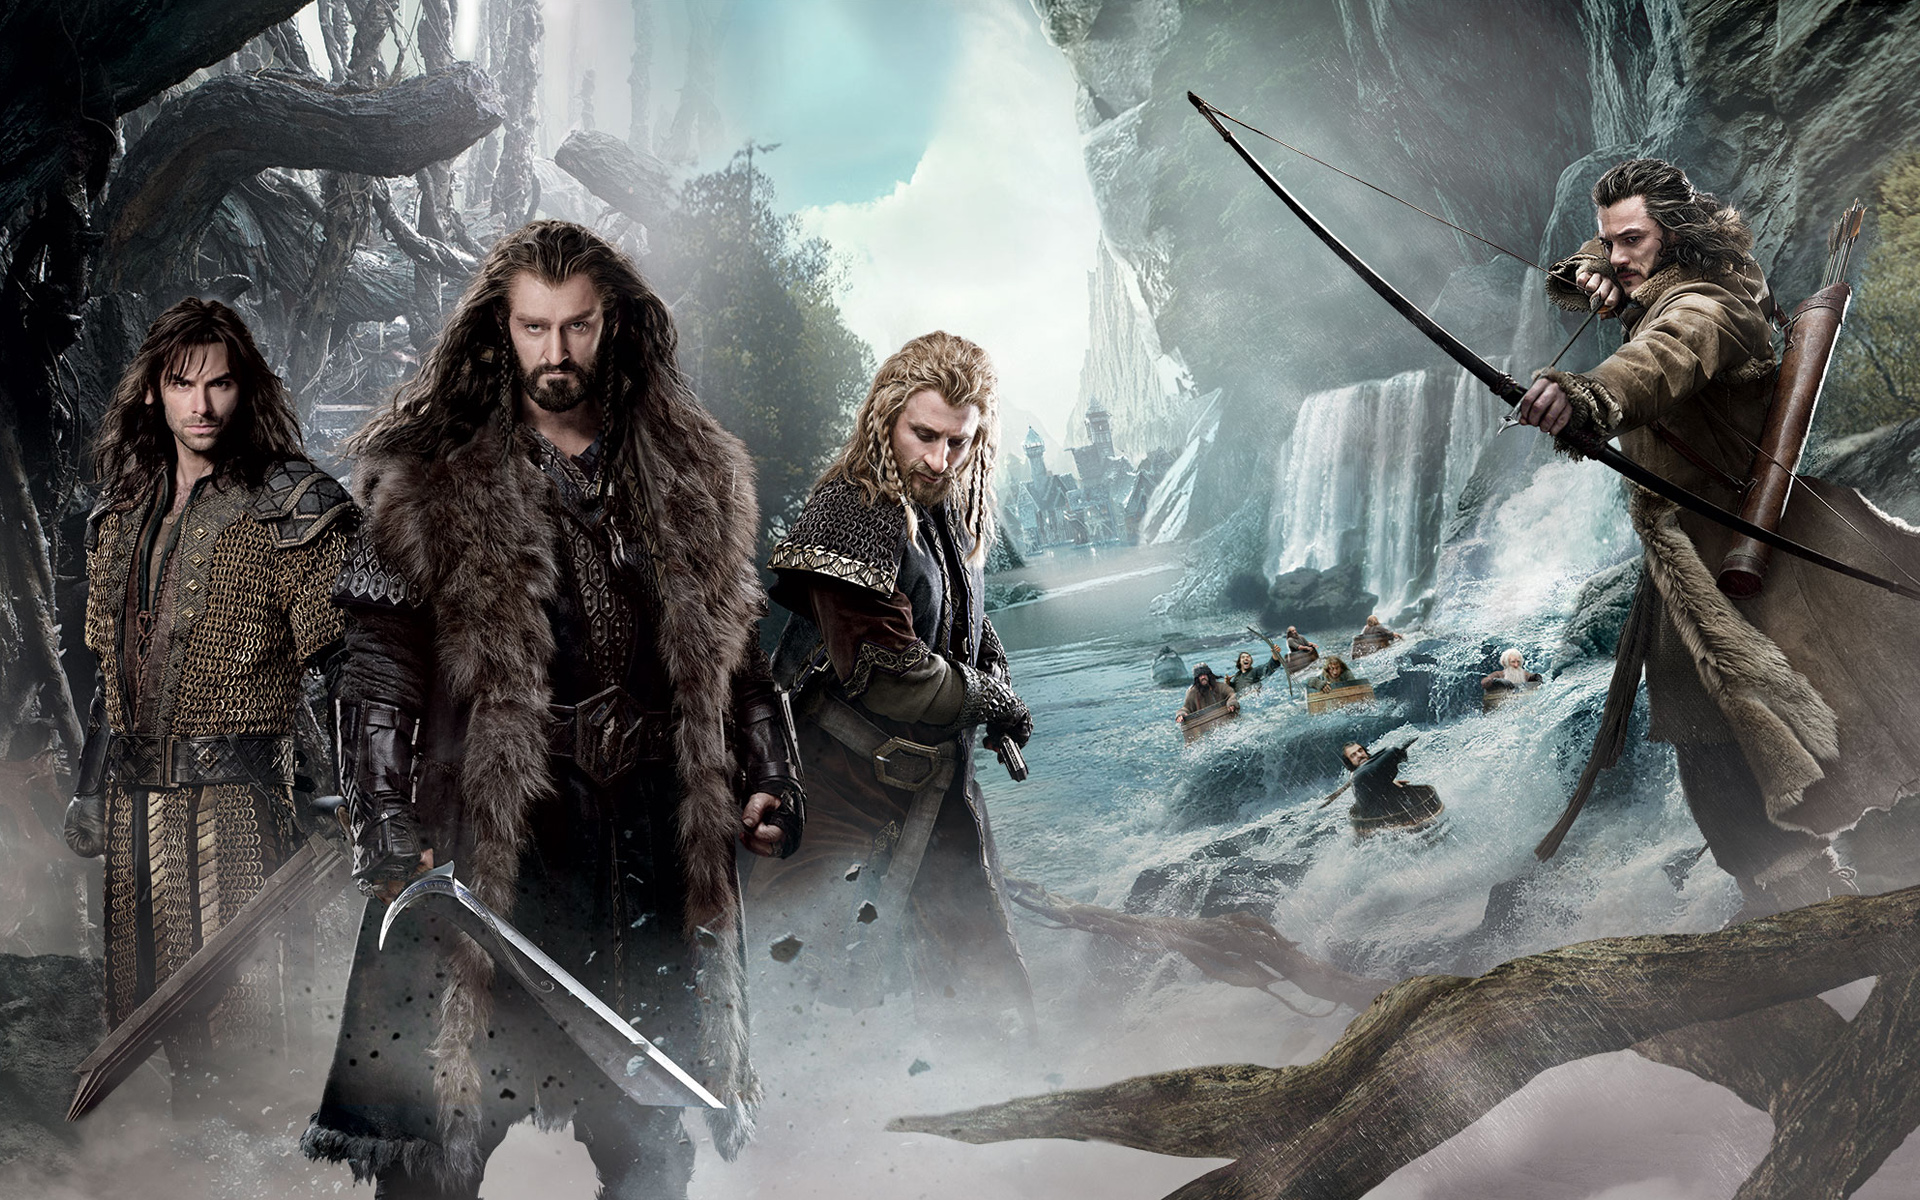 Hobbit 4k Wallpapers For Your Desktop Or Mobile Screen Free And Images, Photos, Reviews